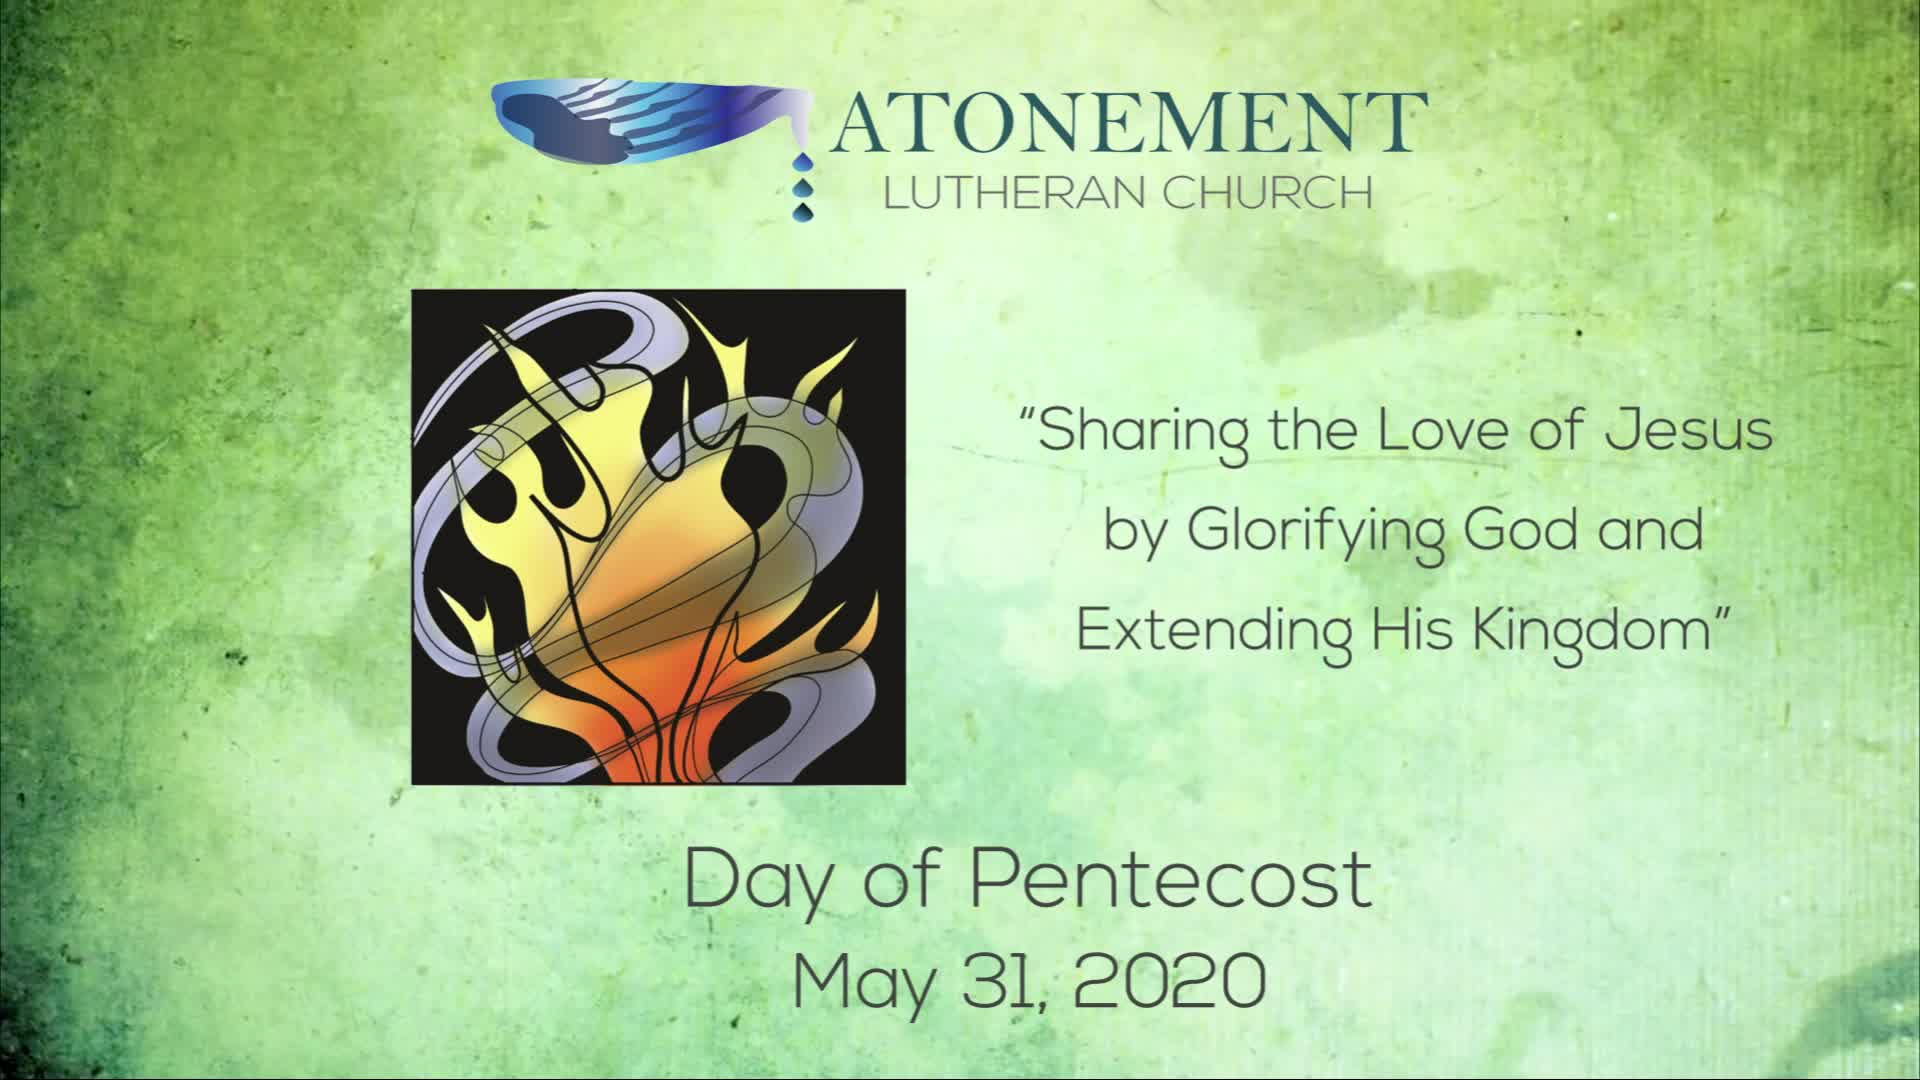 May 31, 2020 Day of Pentecost